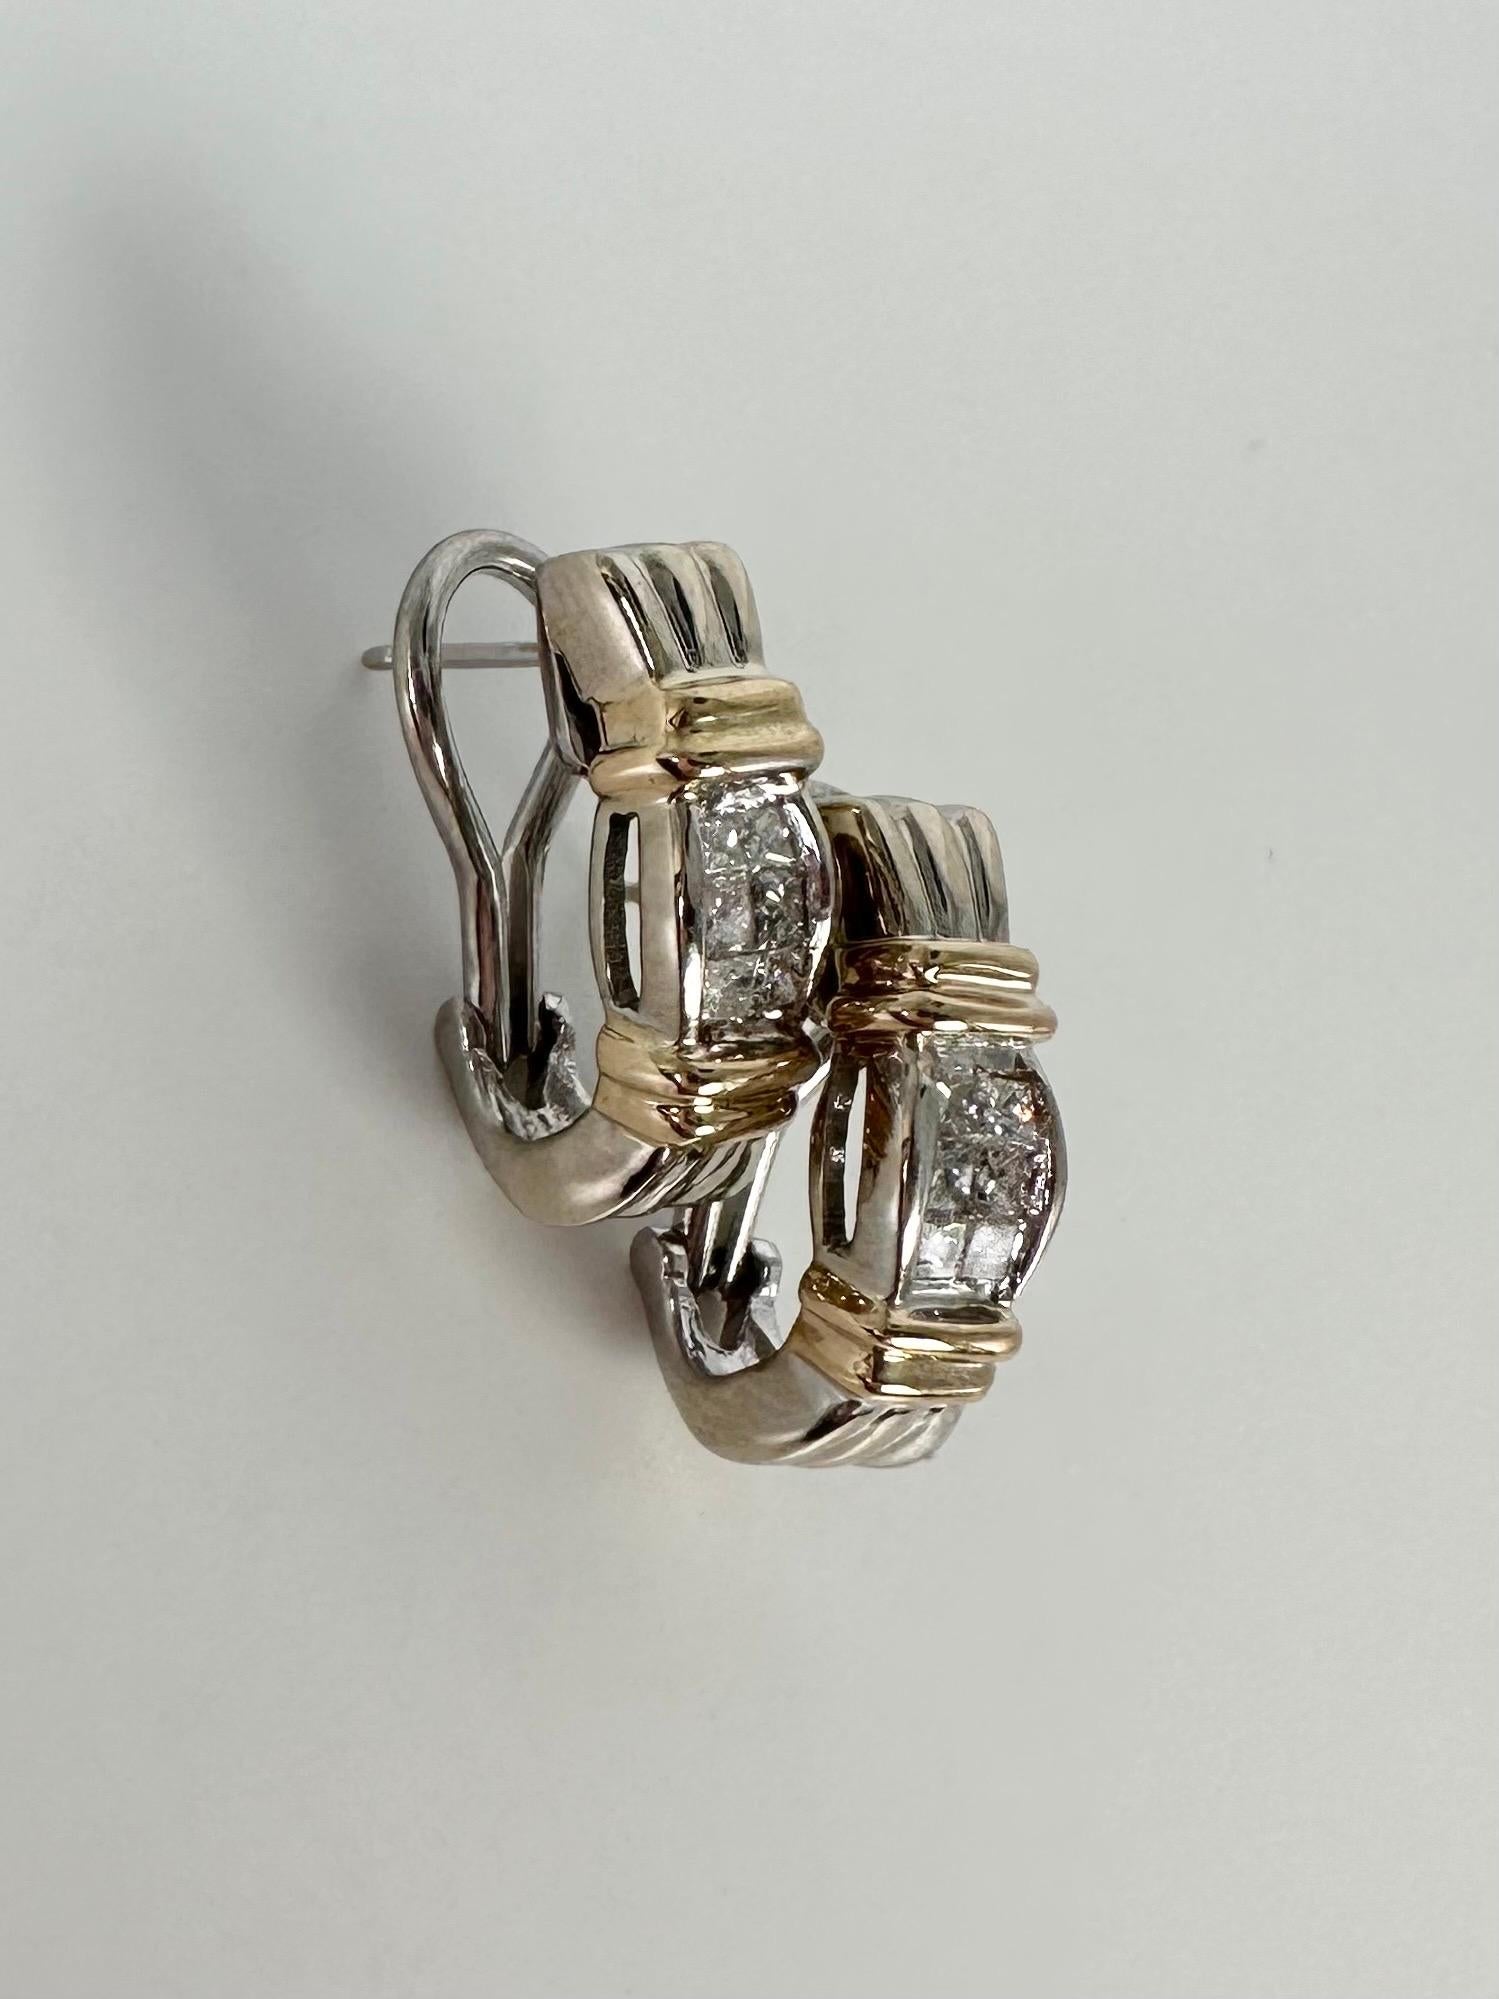 Stunning Omega backing earrings with diamonds set in invisible setting style and bow like design, made in 14KT two tone gold.

GOLD: 14KT gold
NATURAL DIAMOND(S)
Clarity/Color: SI/G
Carat:0.20ct
Grams:7.06
Item#: 150-000157 AOM

WHAT YOU GET AT